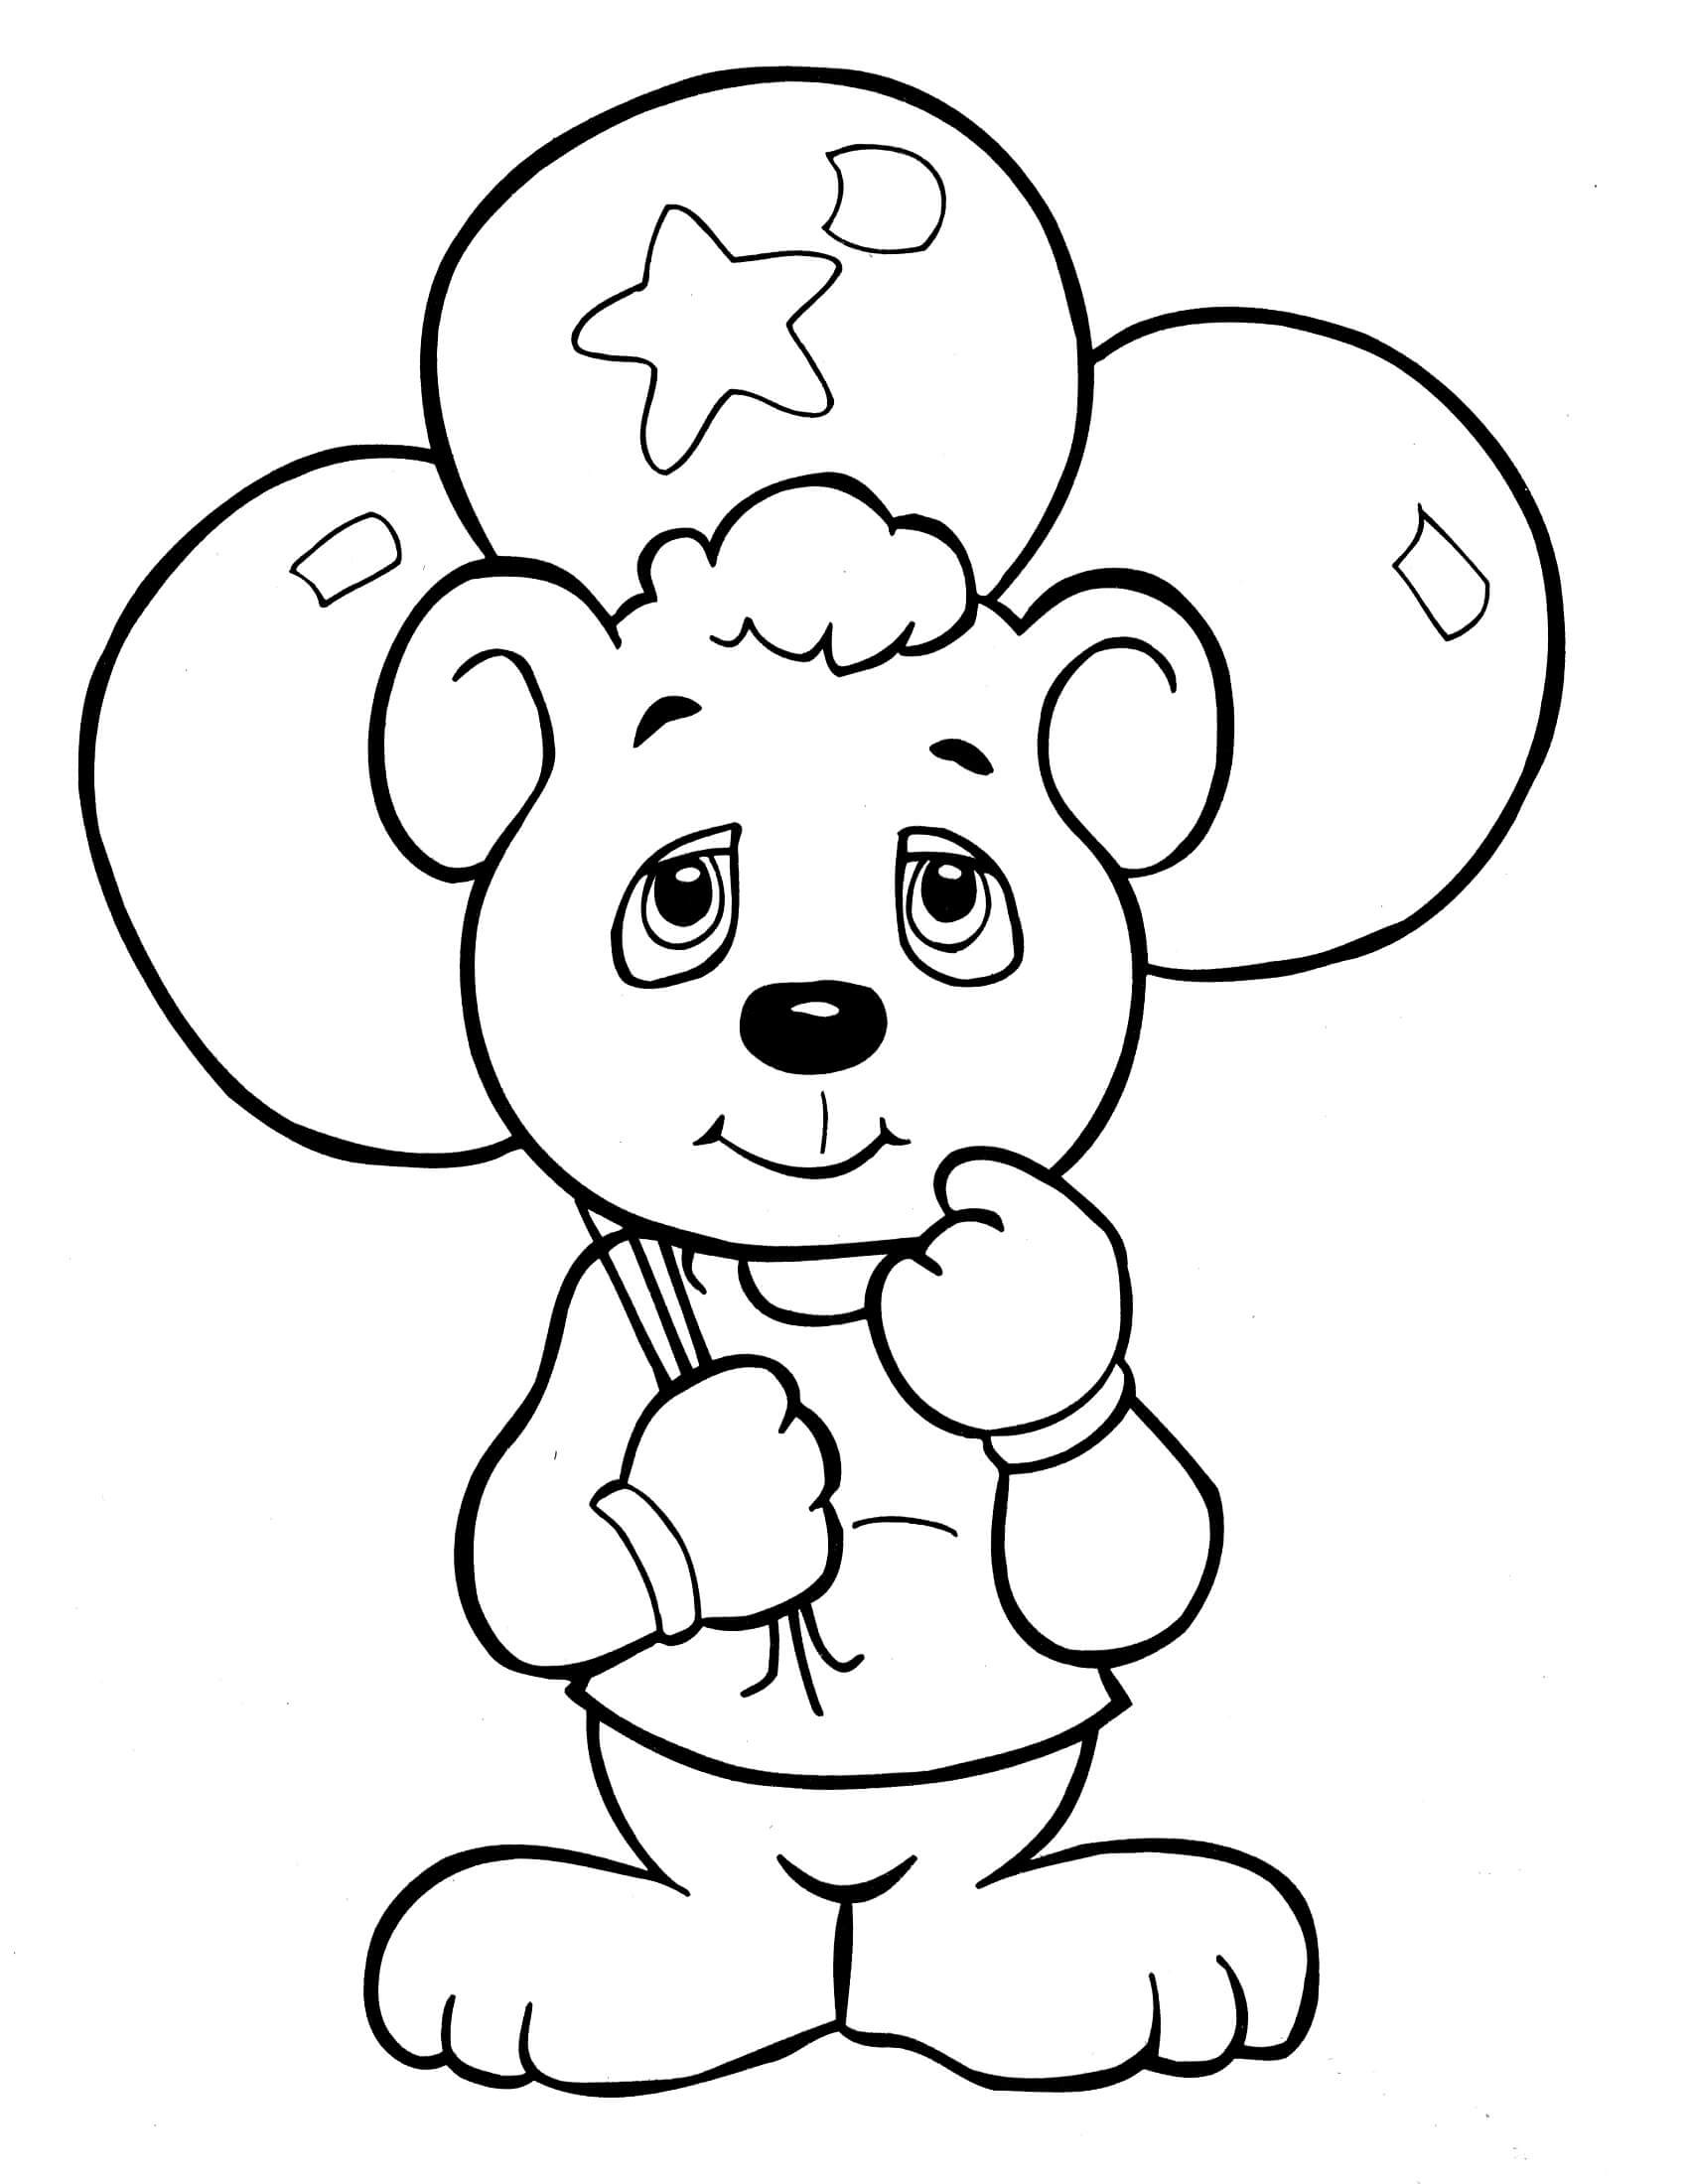 Crayola Coloring Pages For Girls
 Top 25 Crayola Coloring Pages for Girls Best Coloring